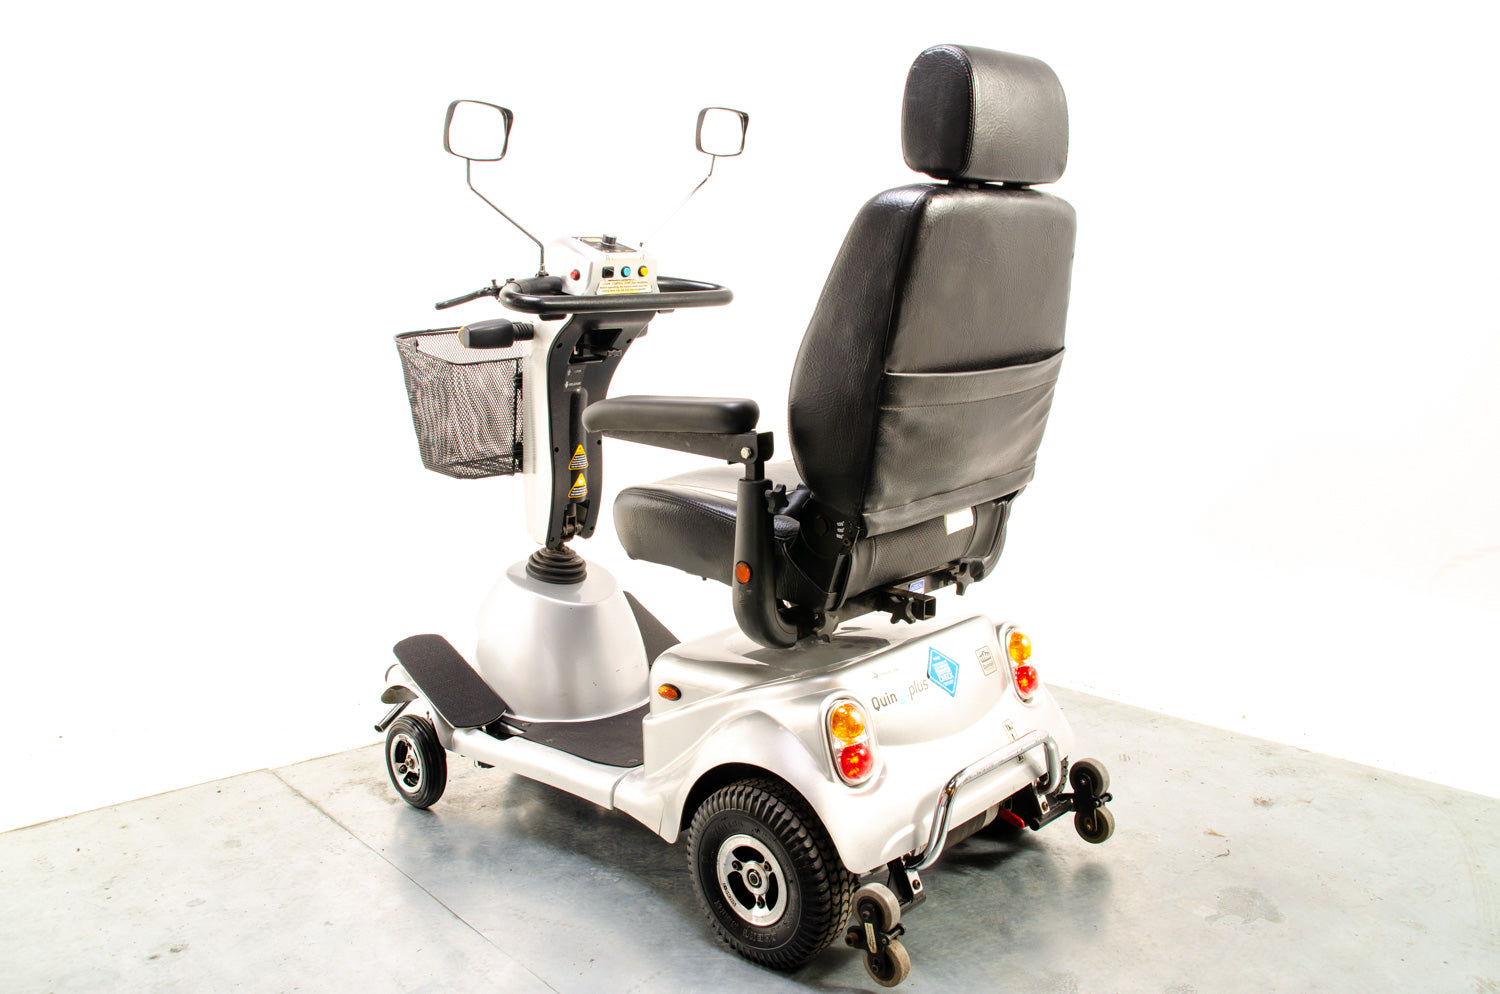 Quingo Plus 8mph Mobility Scooter 5 Wheels Road Pavement Turning Circle Silver AVC